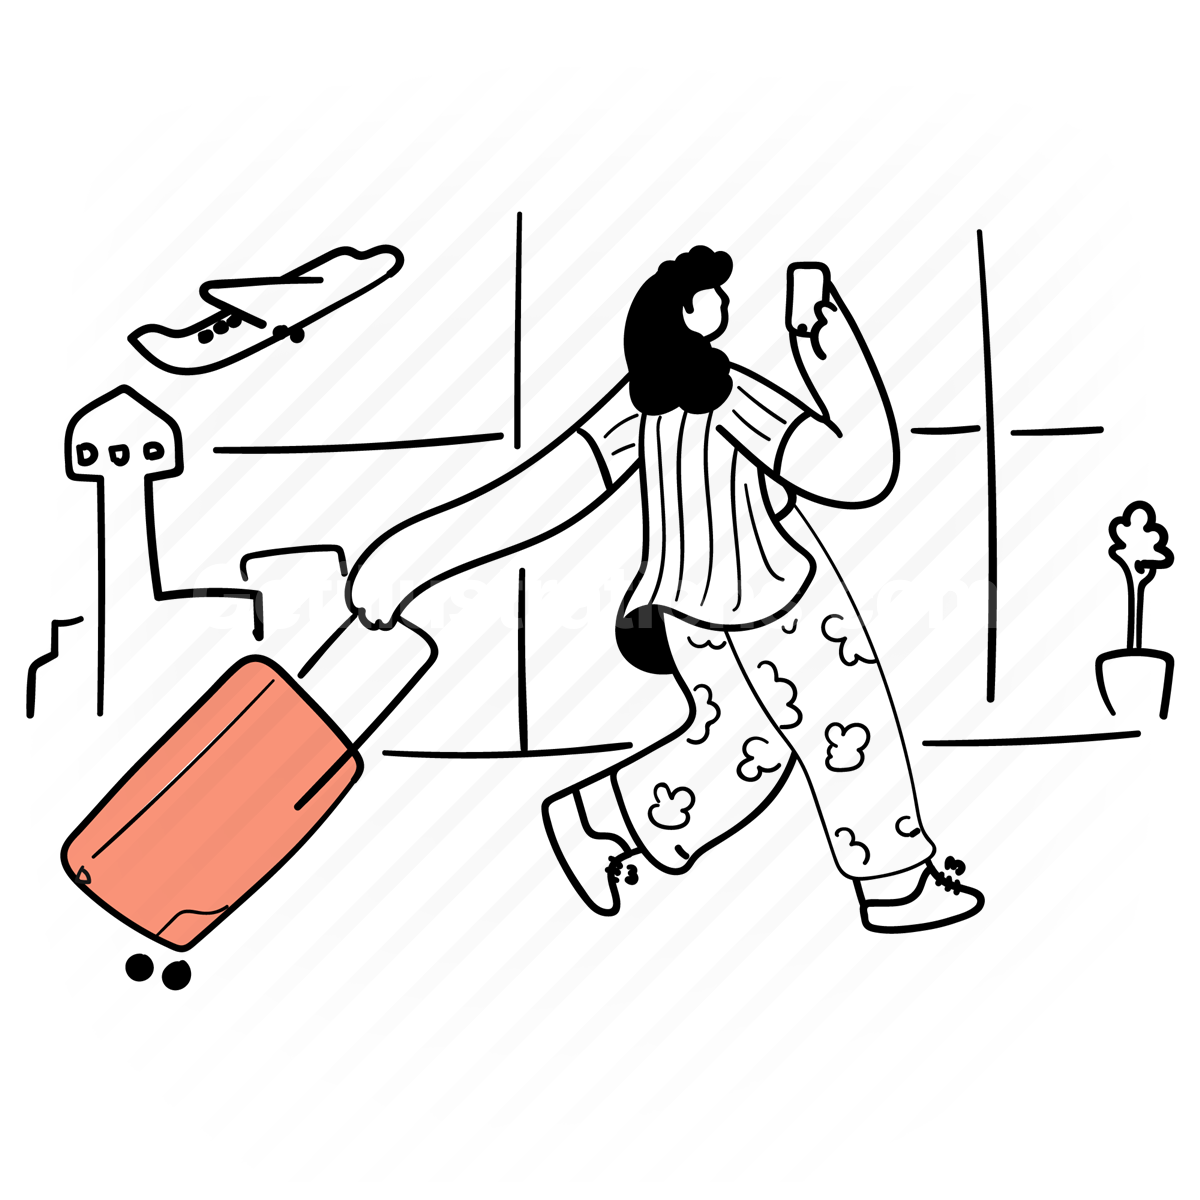 suitcase, luggage, baggage, airplane, airport, travelling, woman, smartphone, mobile